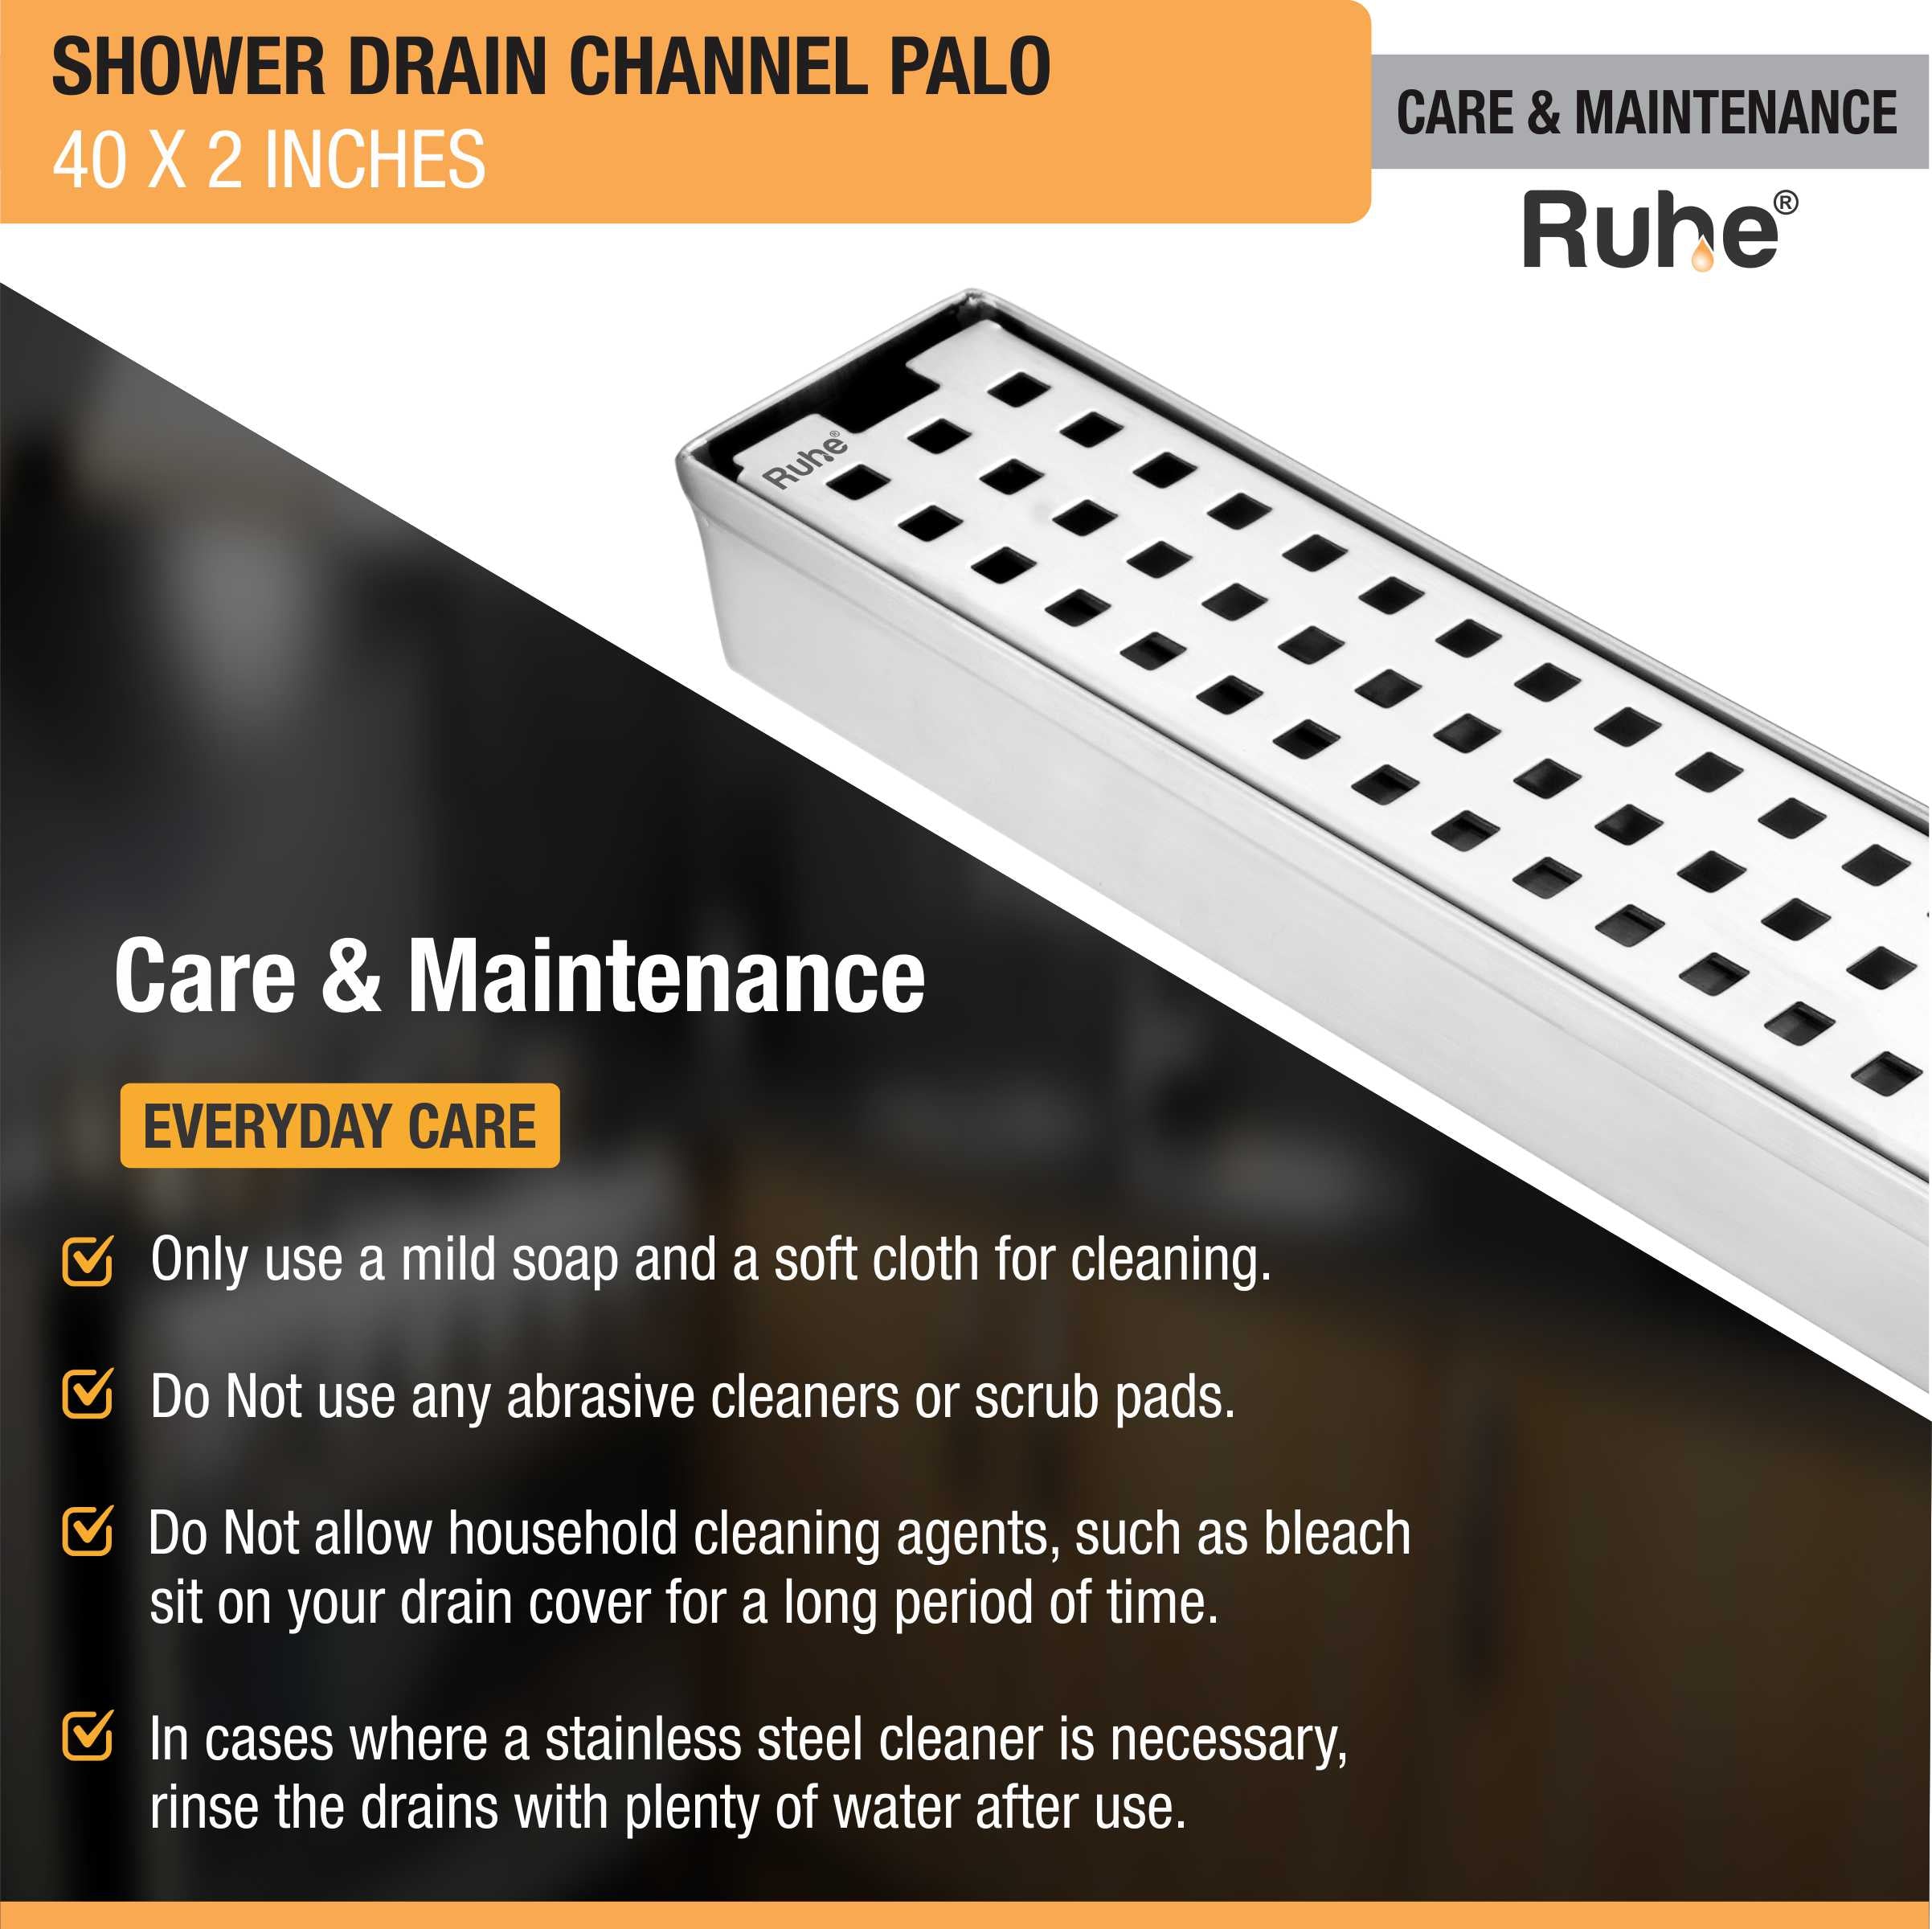 Palo Shower Drain Channel (40 X 2 Inches) (304 Grade) care and maintenance